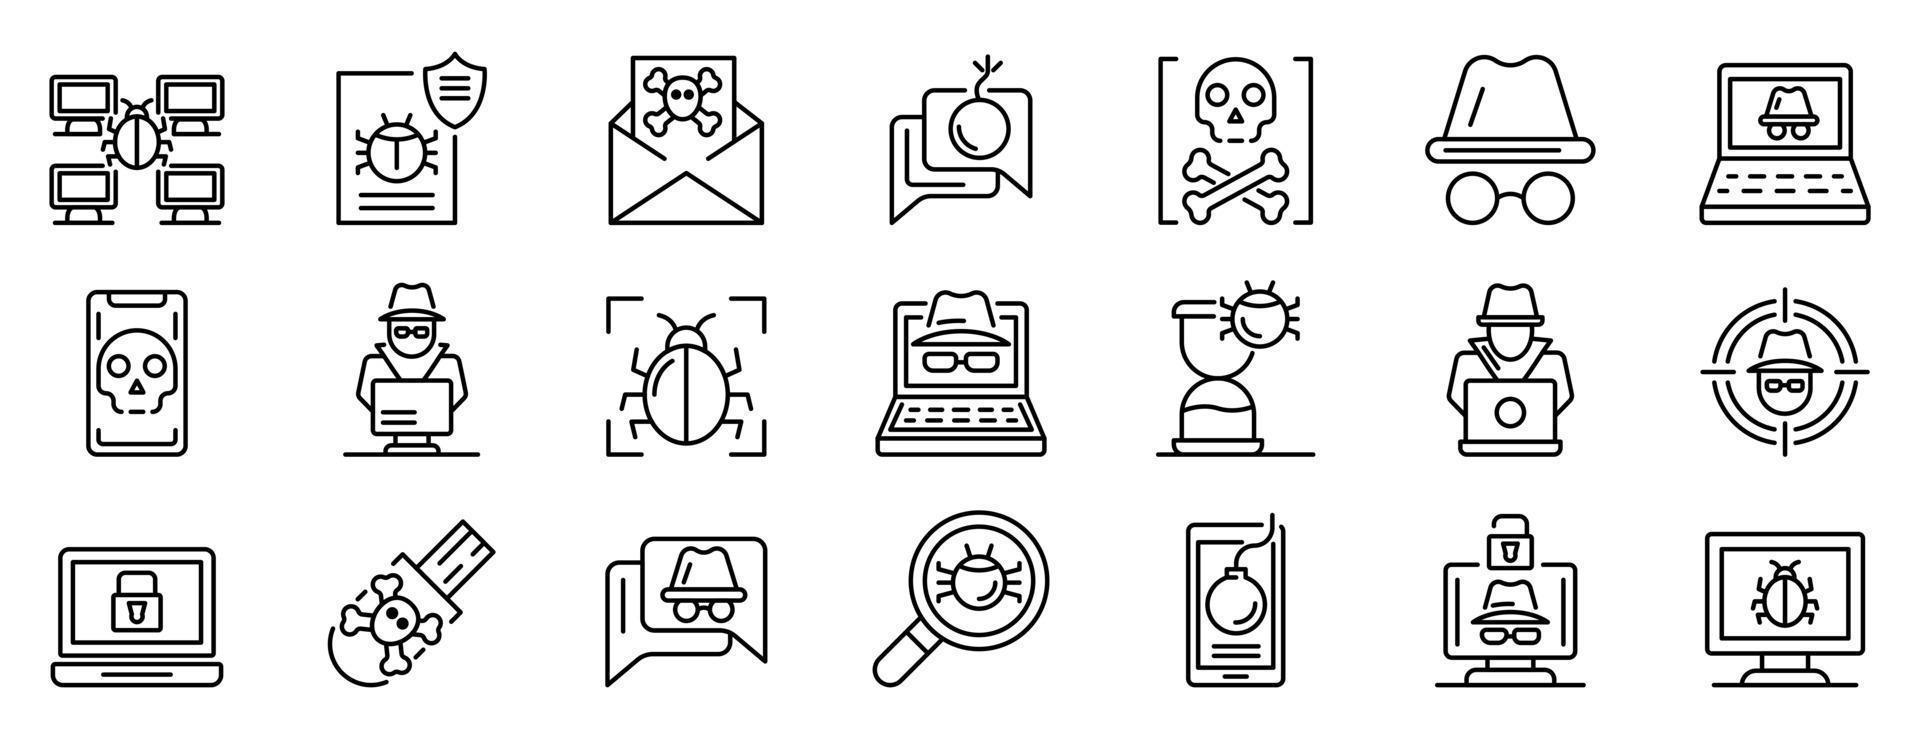 Hacker icons set, outline style vector